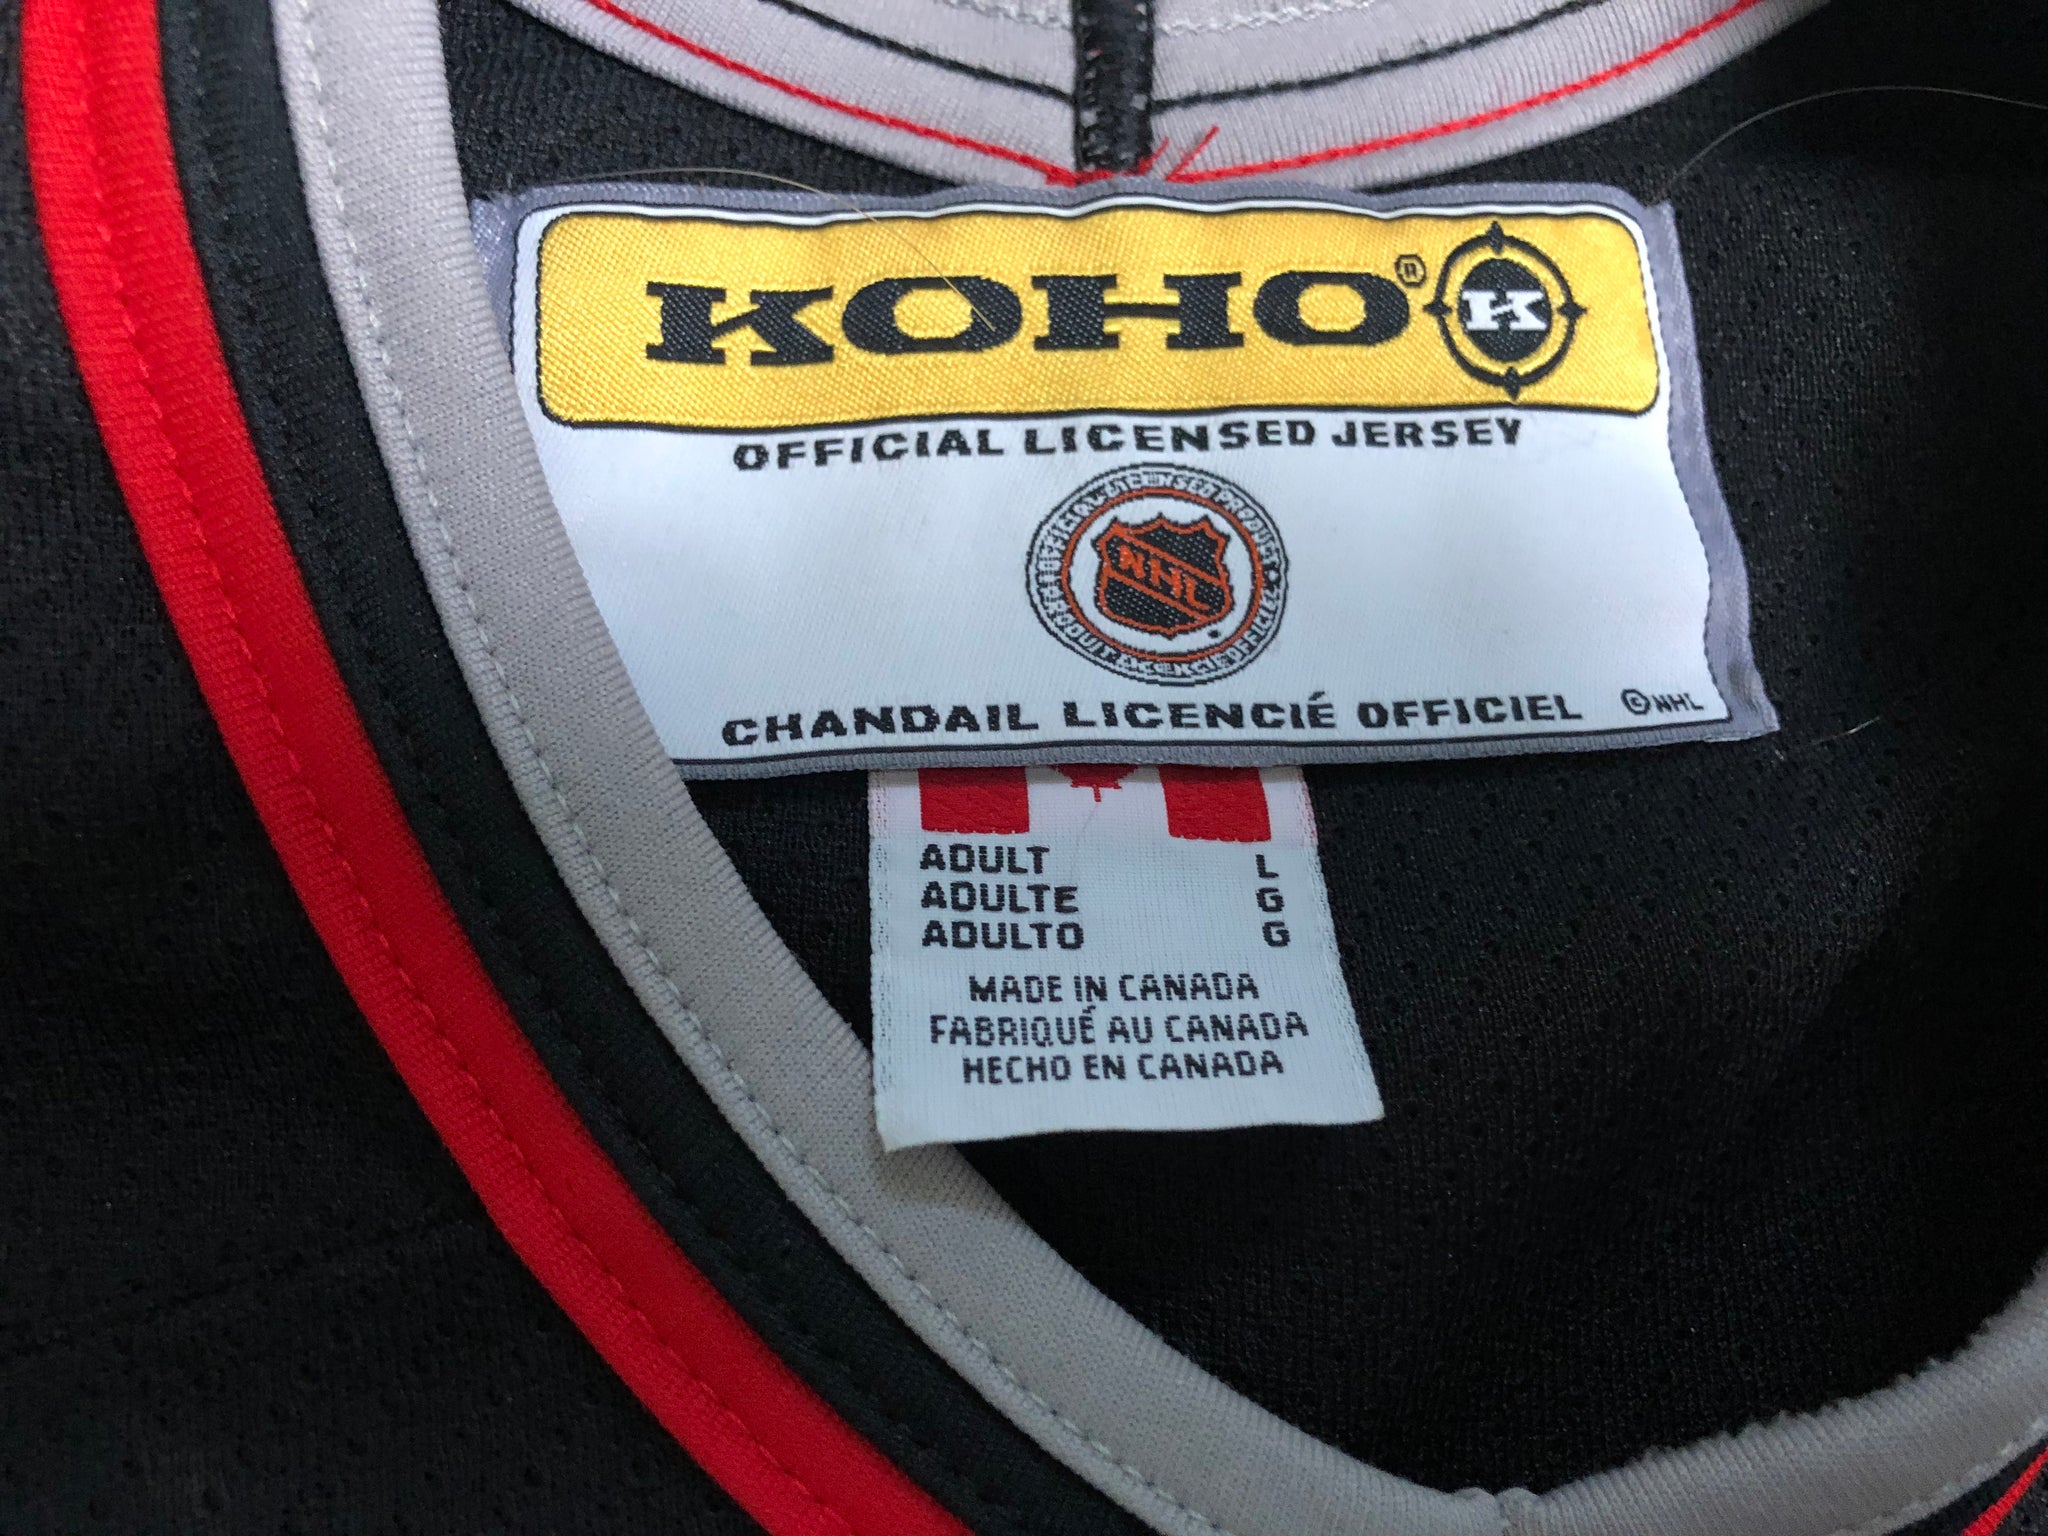 NHL, Shirts, Koho Official Licensed Jersey